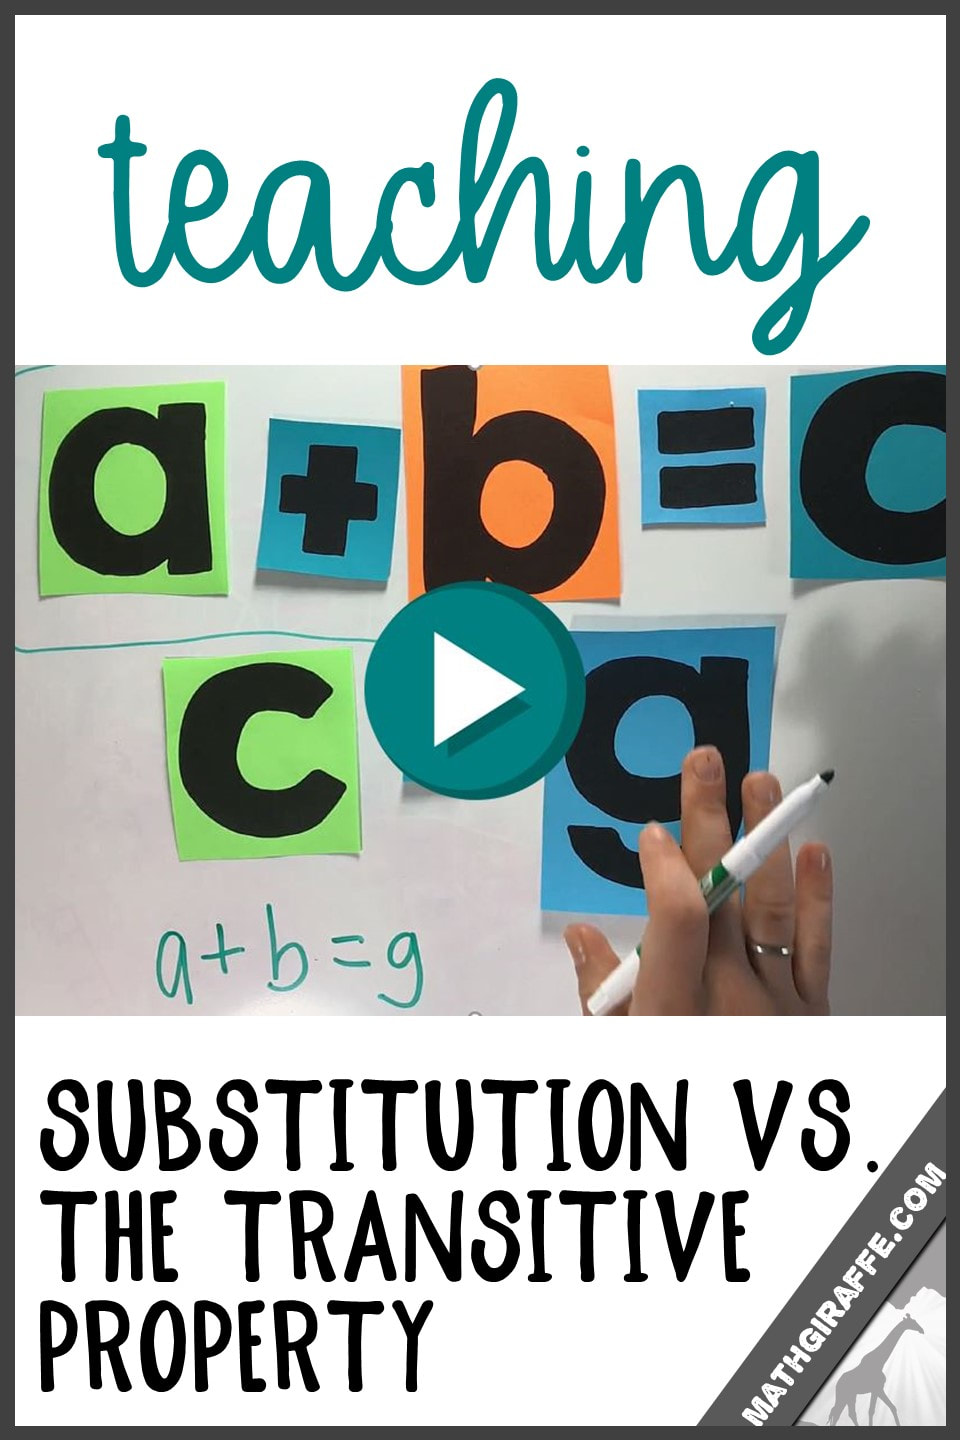 Build Algebraic Reasoning Skills by Explicitly Teaching What so Many Textbooks Neglect: Substitution vs. the Transitive Property